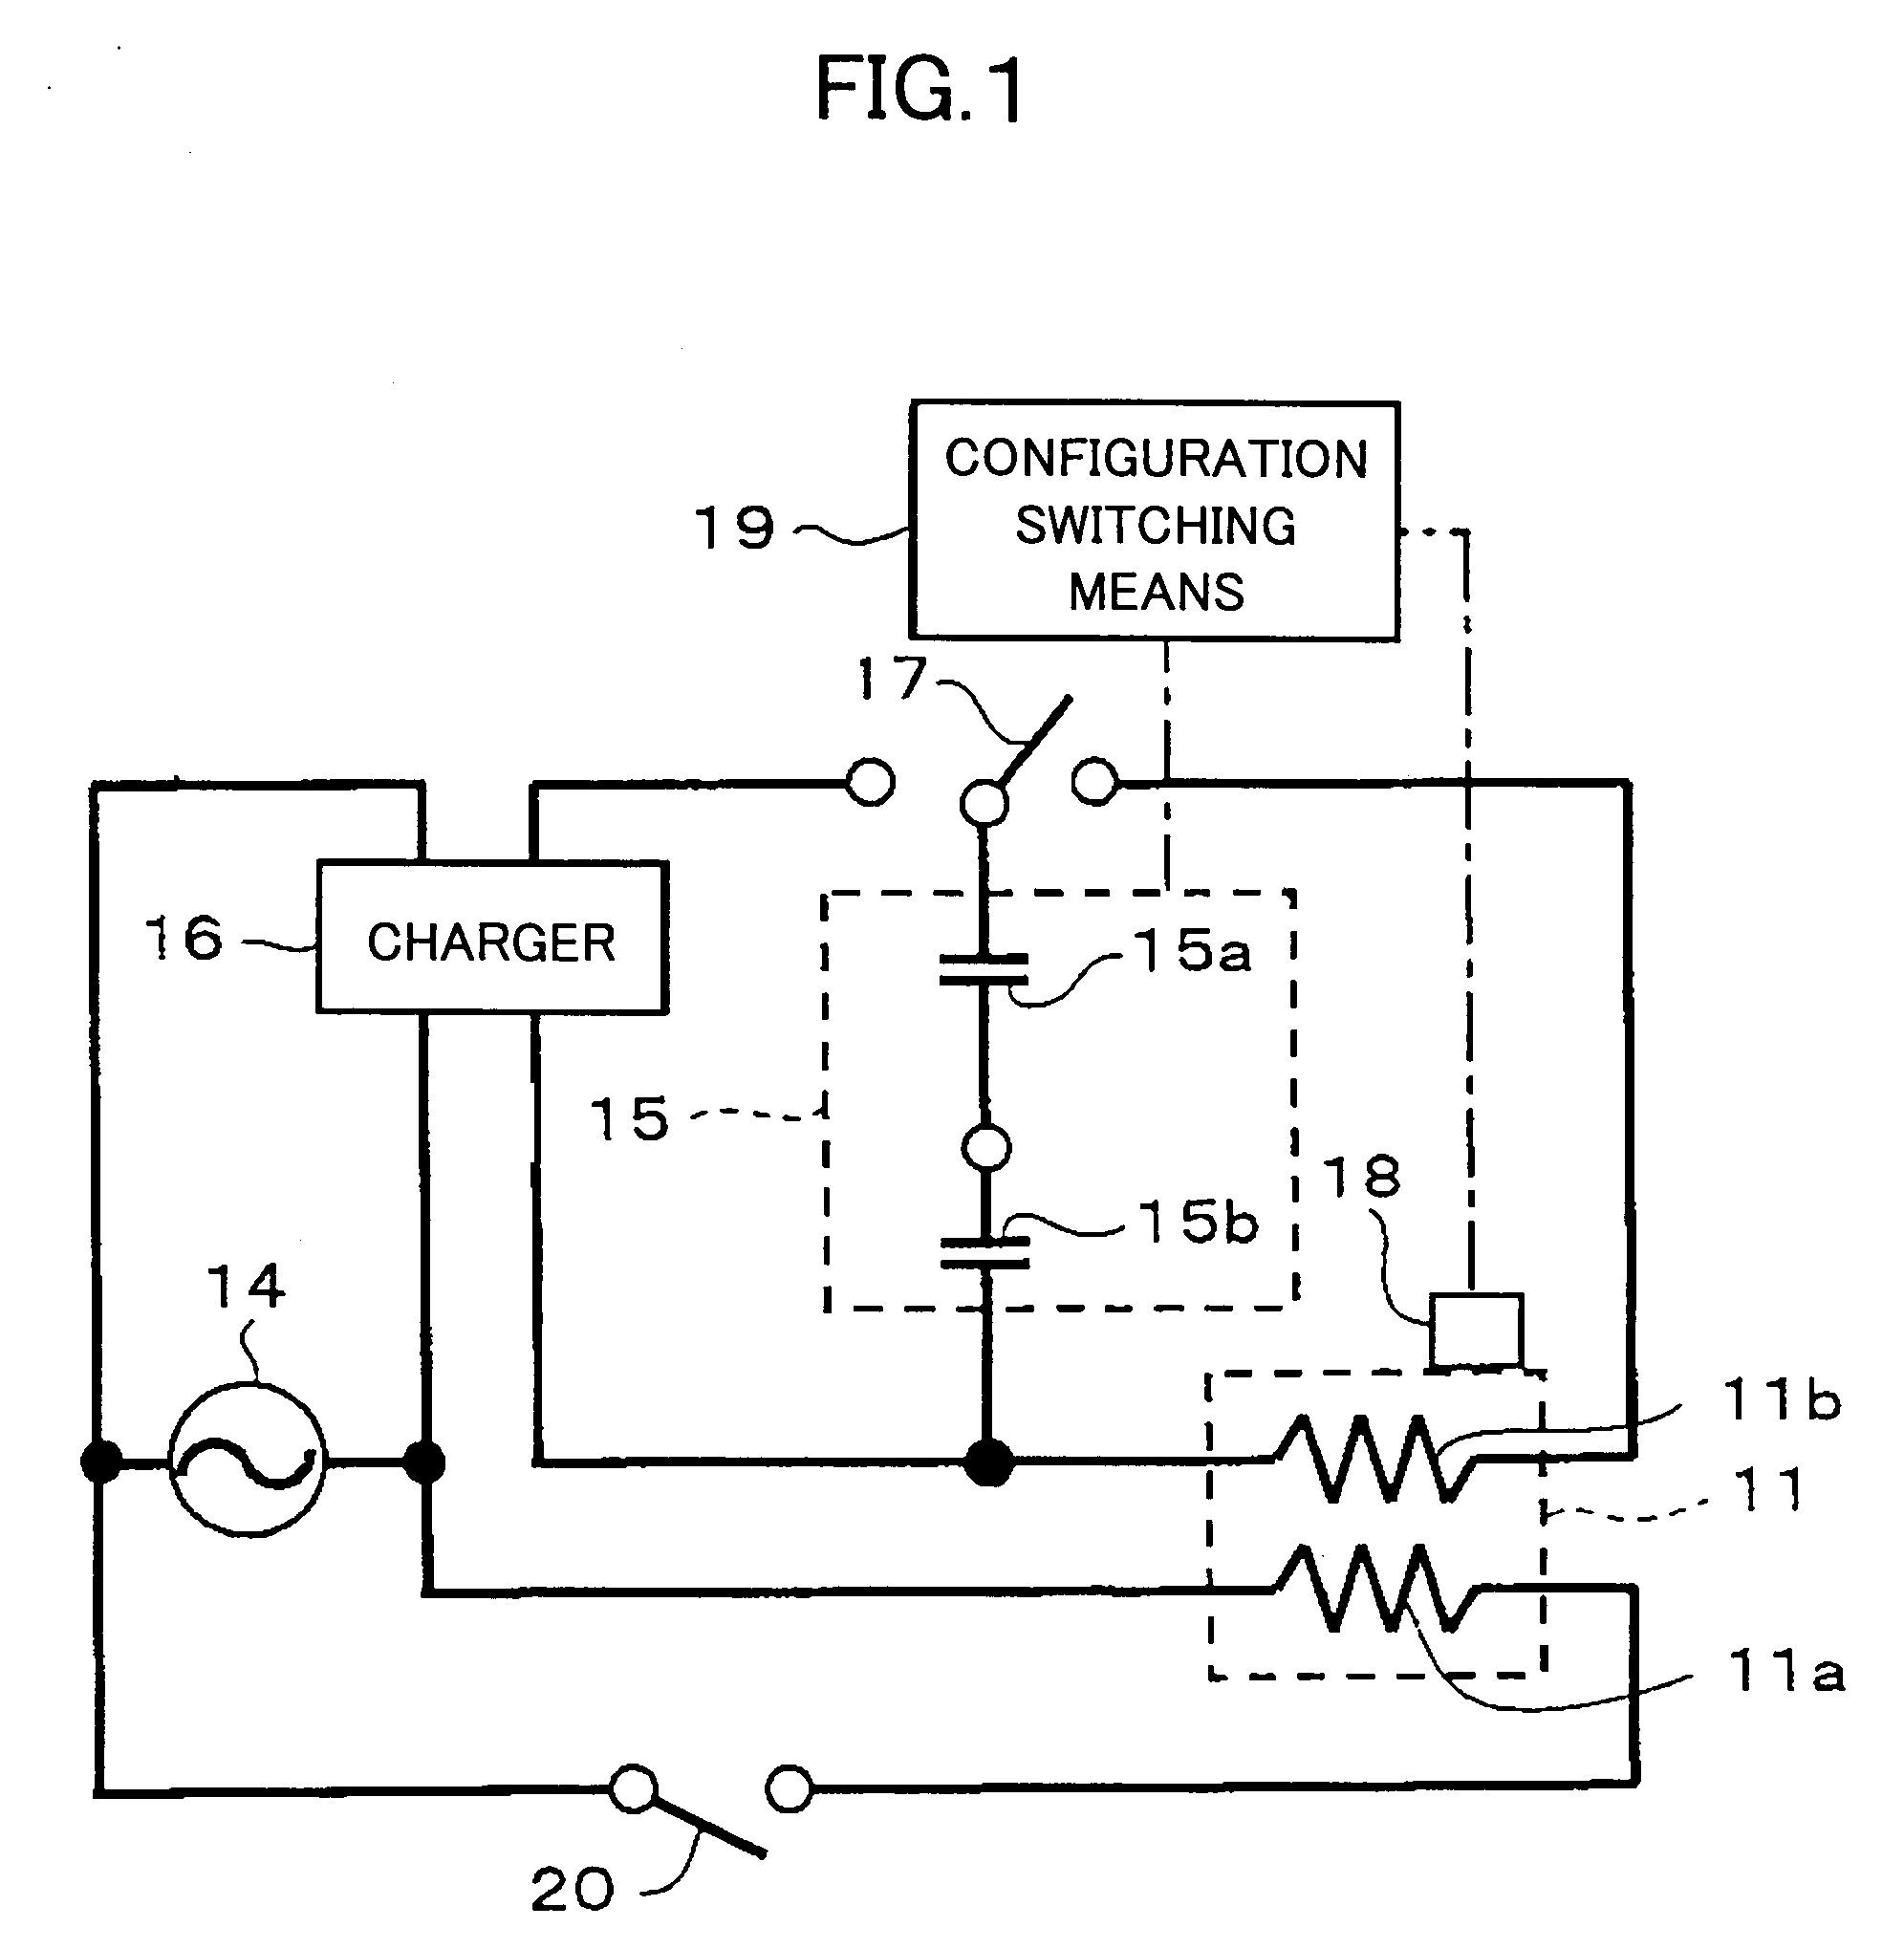 Heating apparatus for increasing temperature in short period of time with minimum overshoot